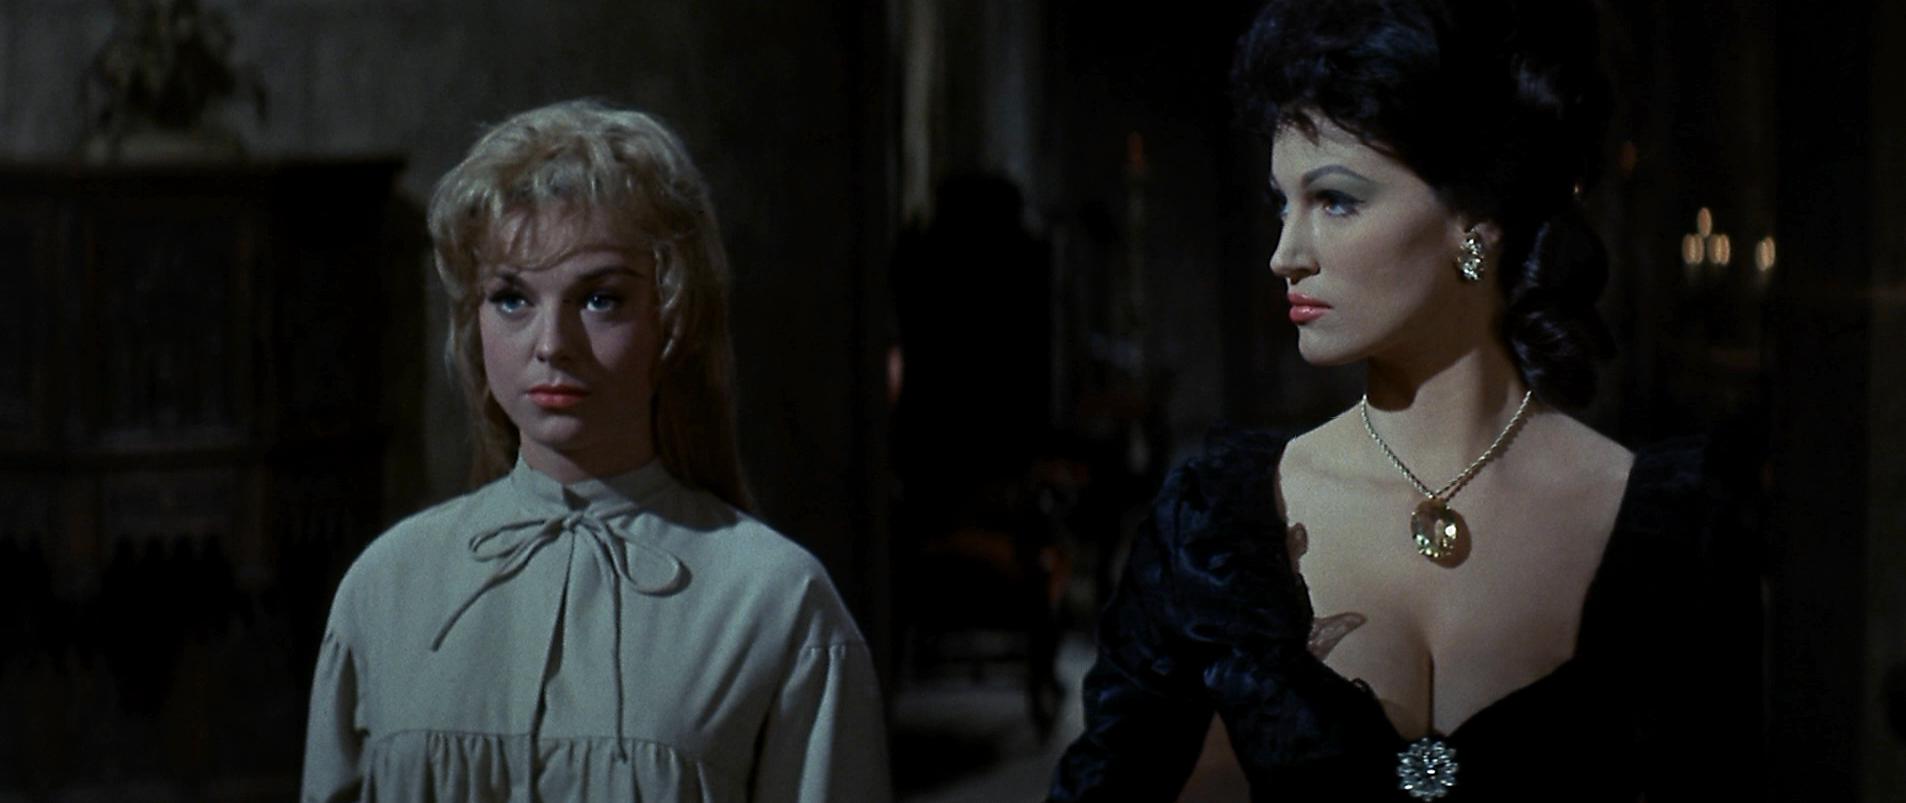 Darlene Lucht and Cathie Merchant in The Haunted Palace (1963)